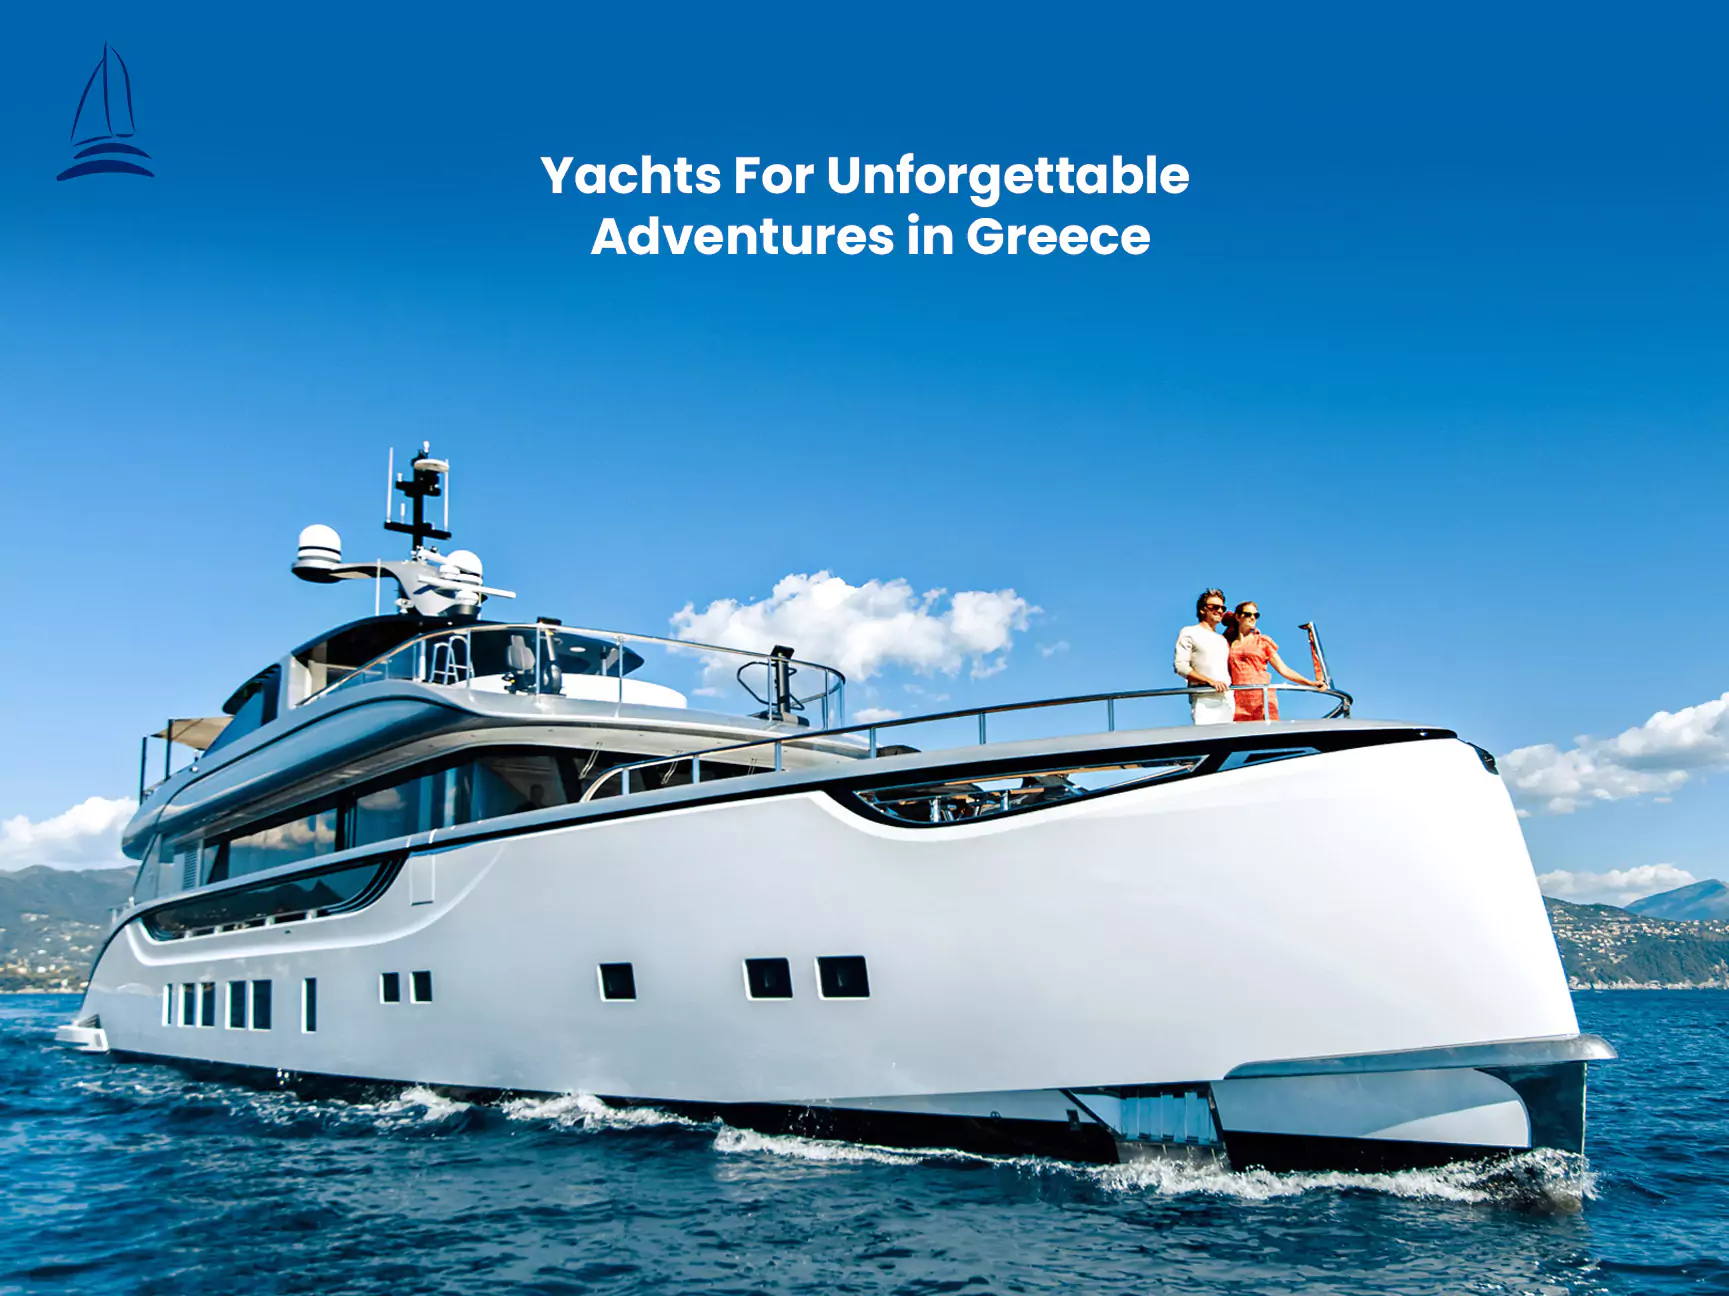 Yachts For Unforgettable Adventures in Greece img